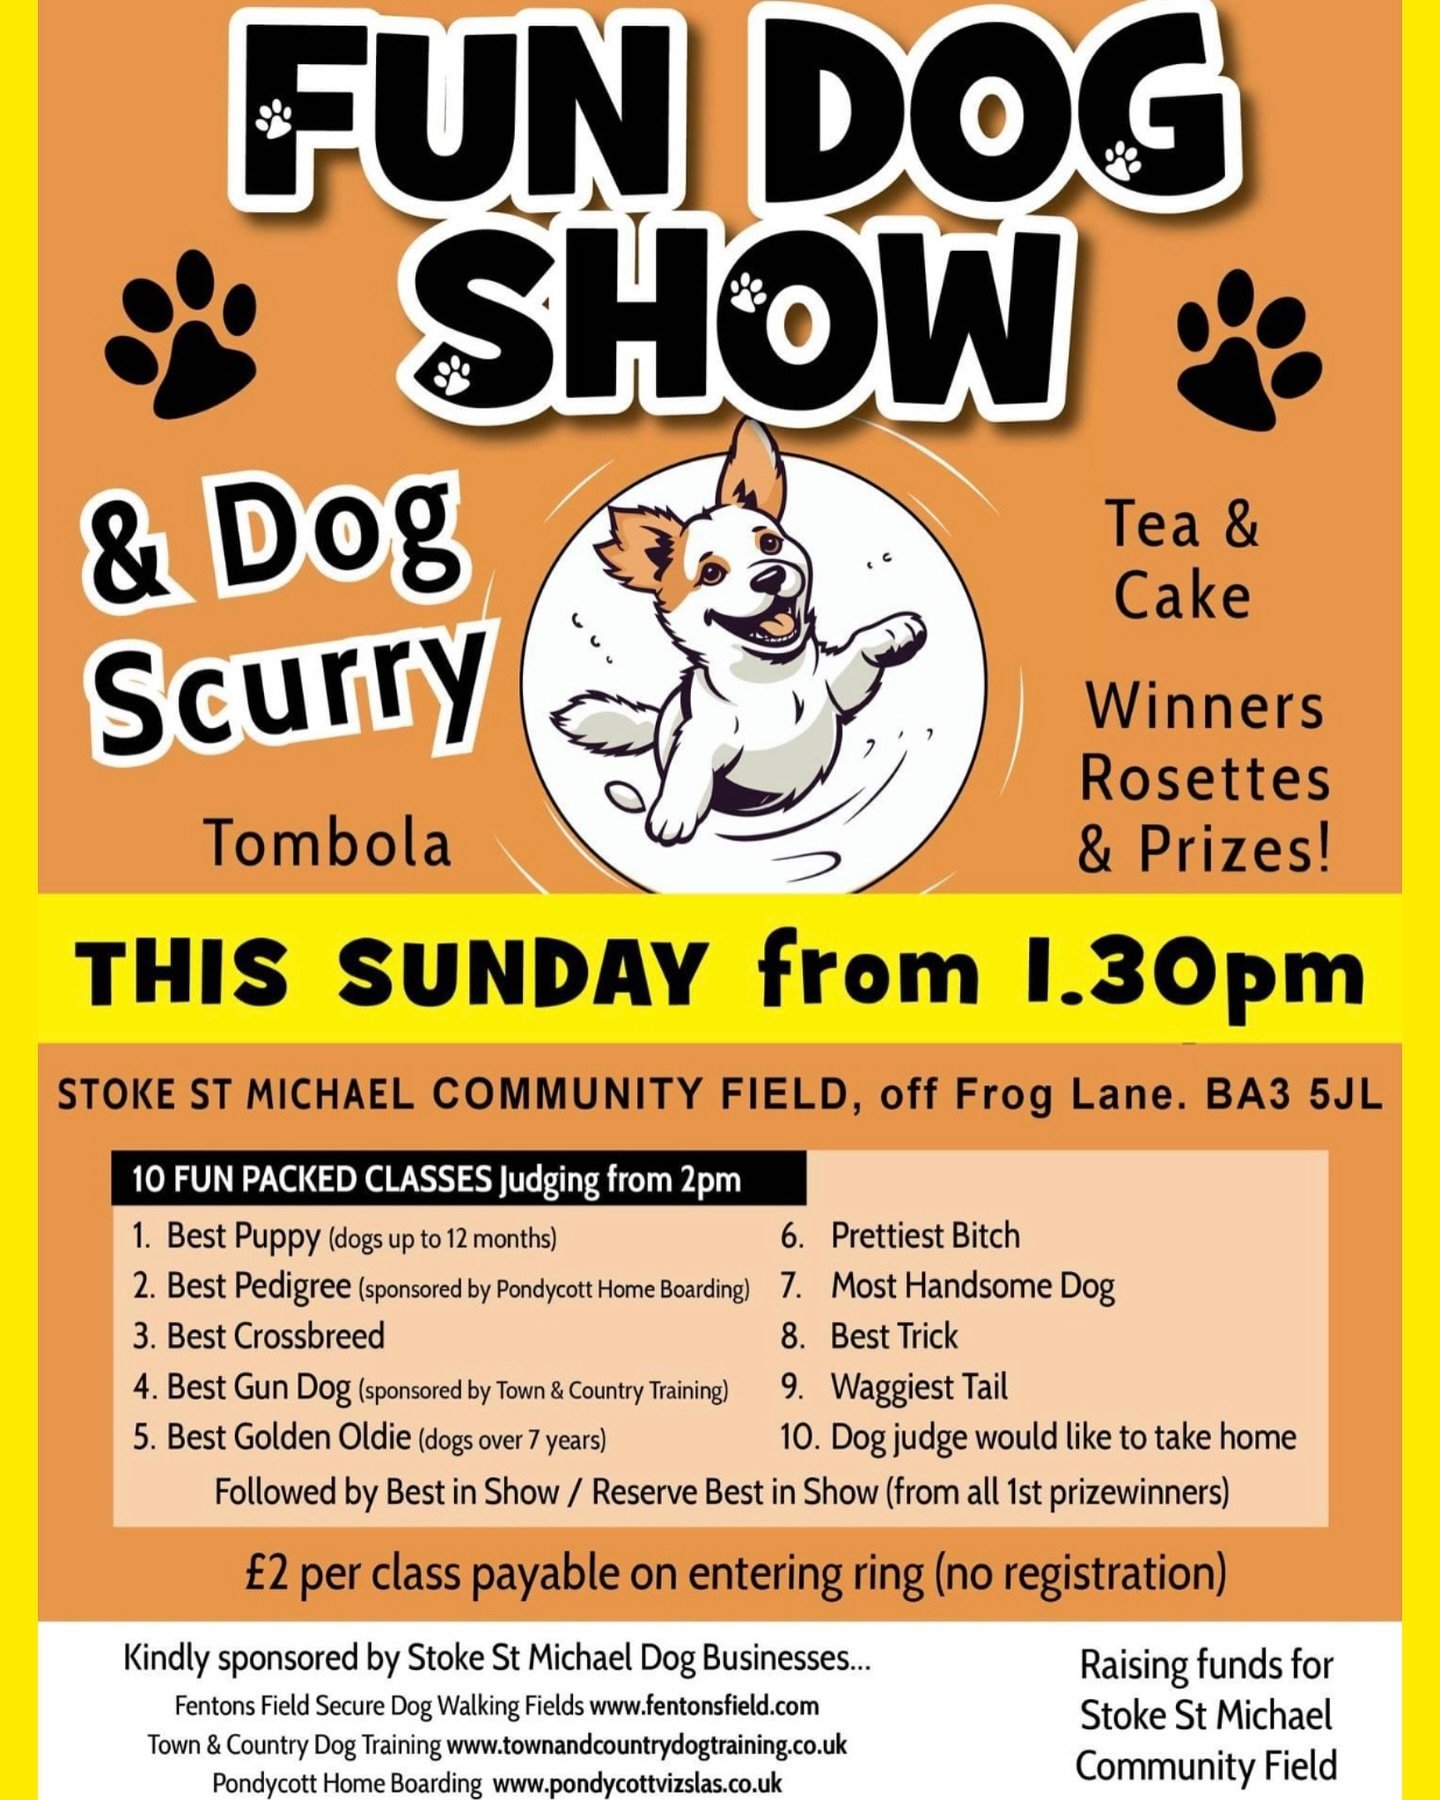 Don&rsquo;t forget the Dog Show this Sunday at 1.30pm at Stoke St Michael Playing Field
The weather looks cooler and cloudier which will be ideal for the dogs, let&rsquo;s hope the rain stays away and we can enjoy a lovely afternoon. There will be pl